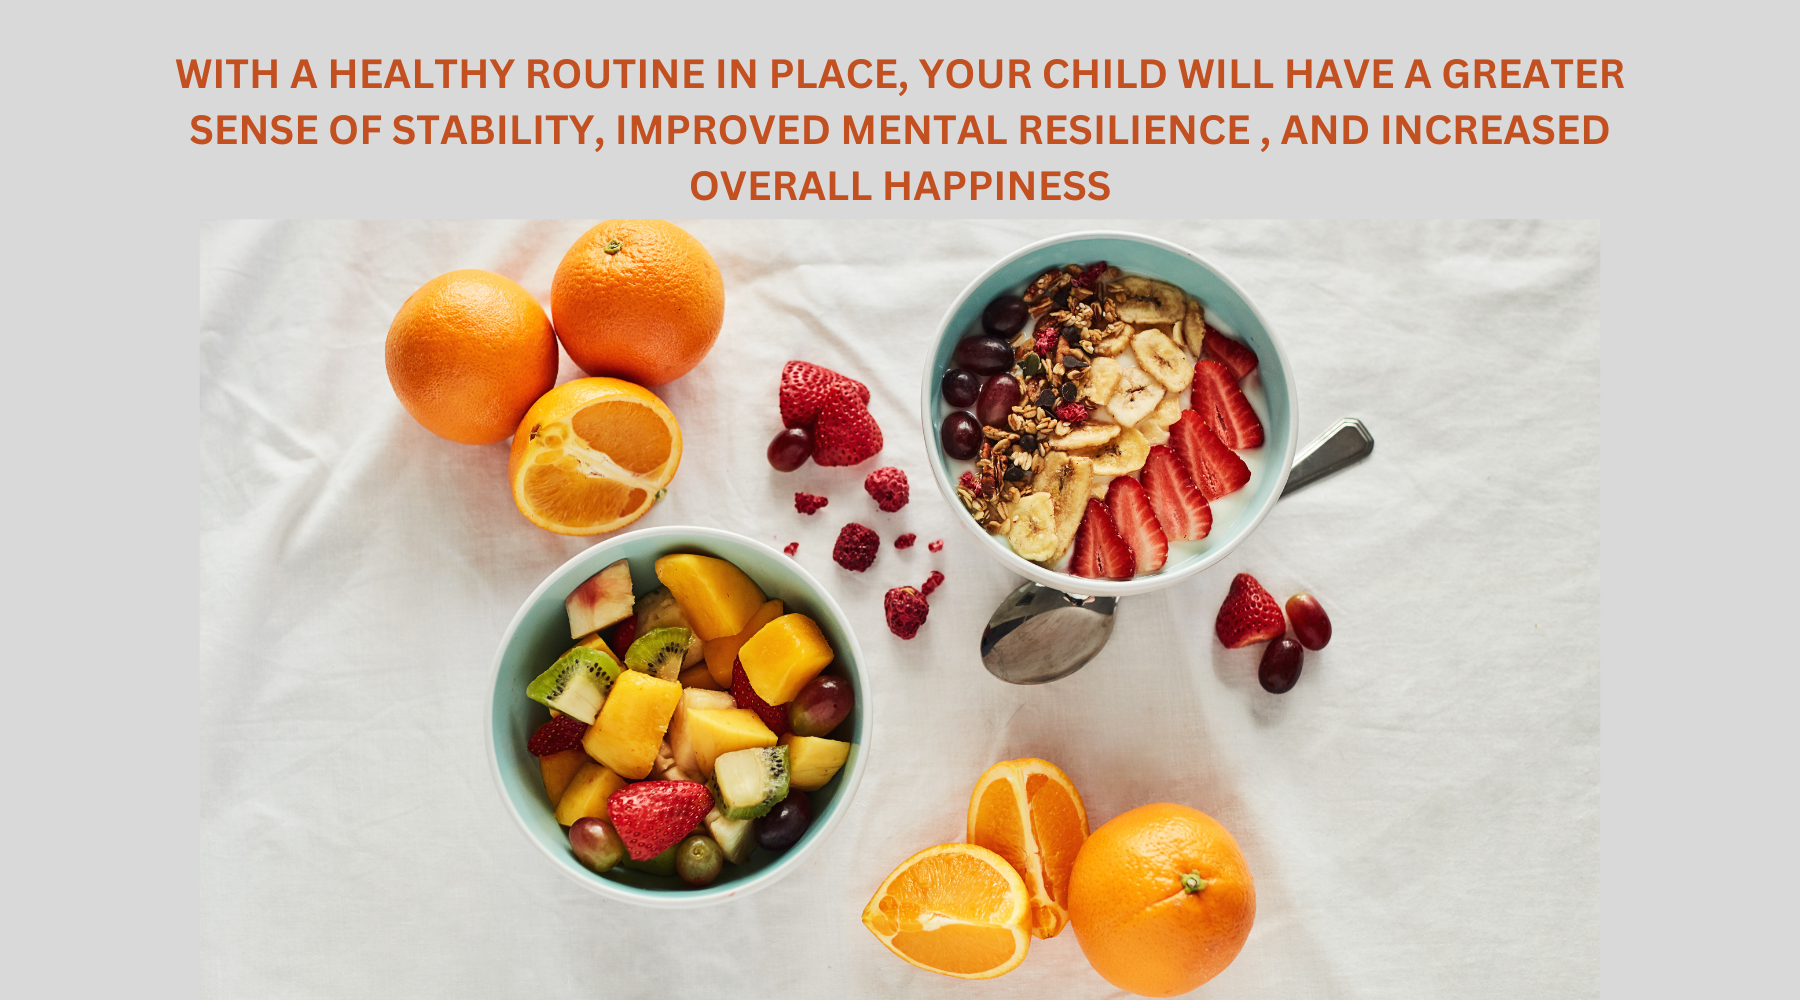 How to Build a Healthy Routine for Your Child’s Mental Health